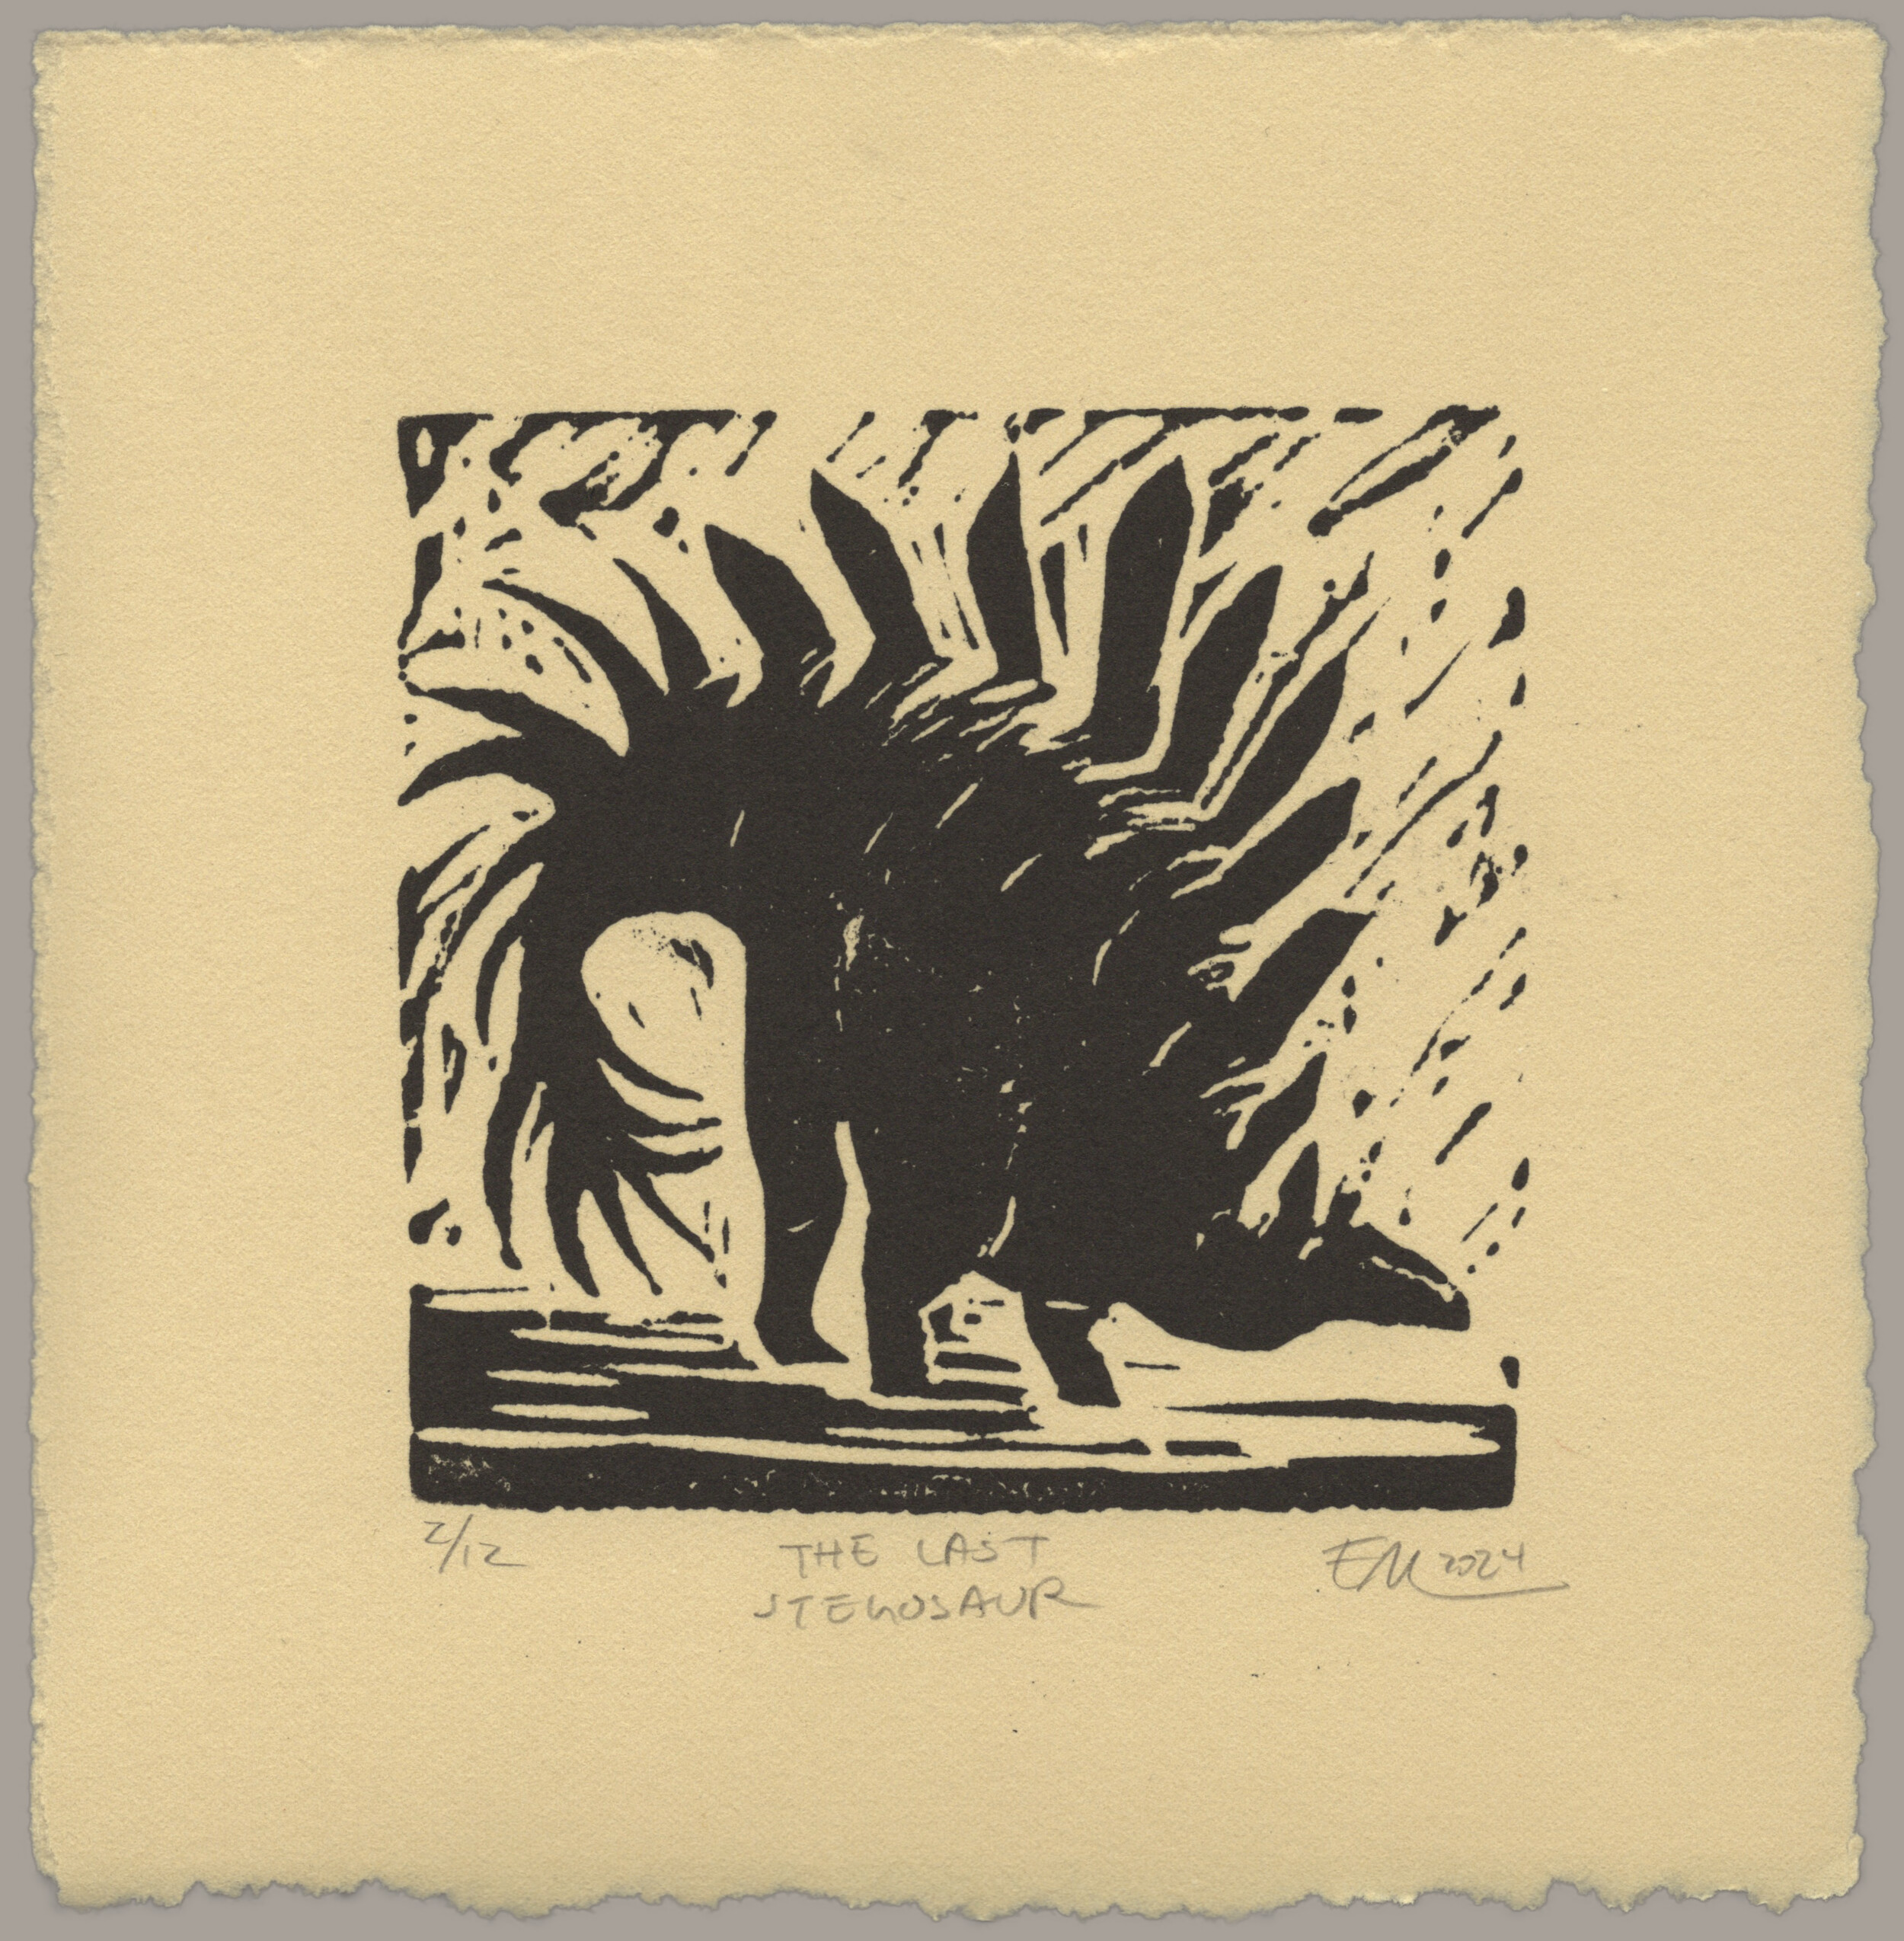 A black linocut print on warm, sand-colored paper showing a large dinosaur with tall plates petruding from its back. Its head is low to the ground and its back is arched. Its spiked tail curves back towards the ground in a defensive pose. The print is signed '2 of 12, The Last Stegosaur, EM 2024'